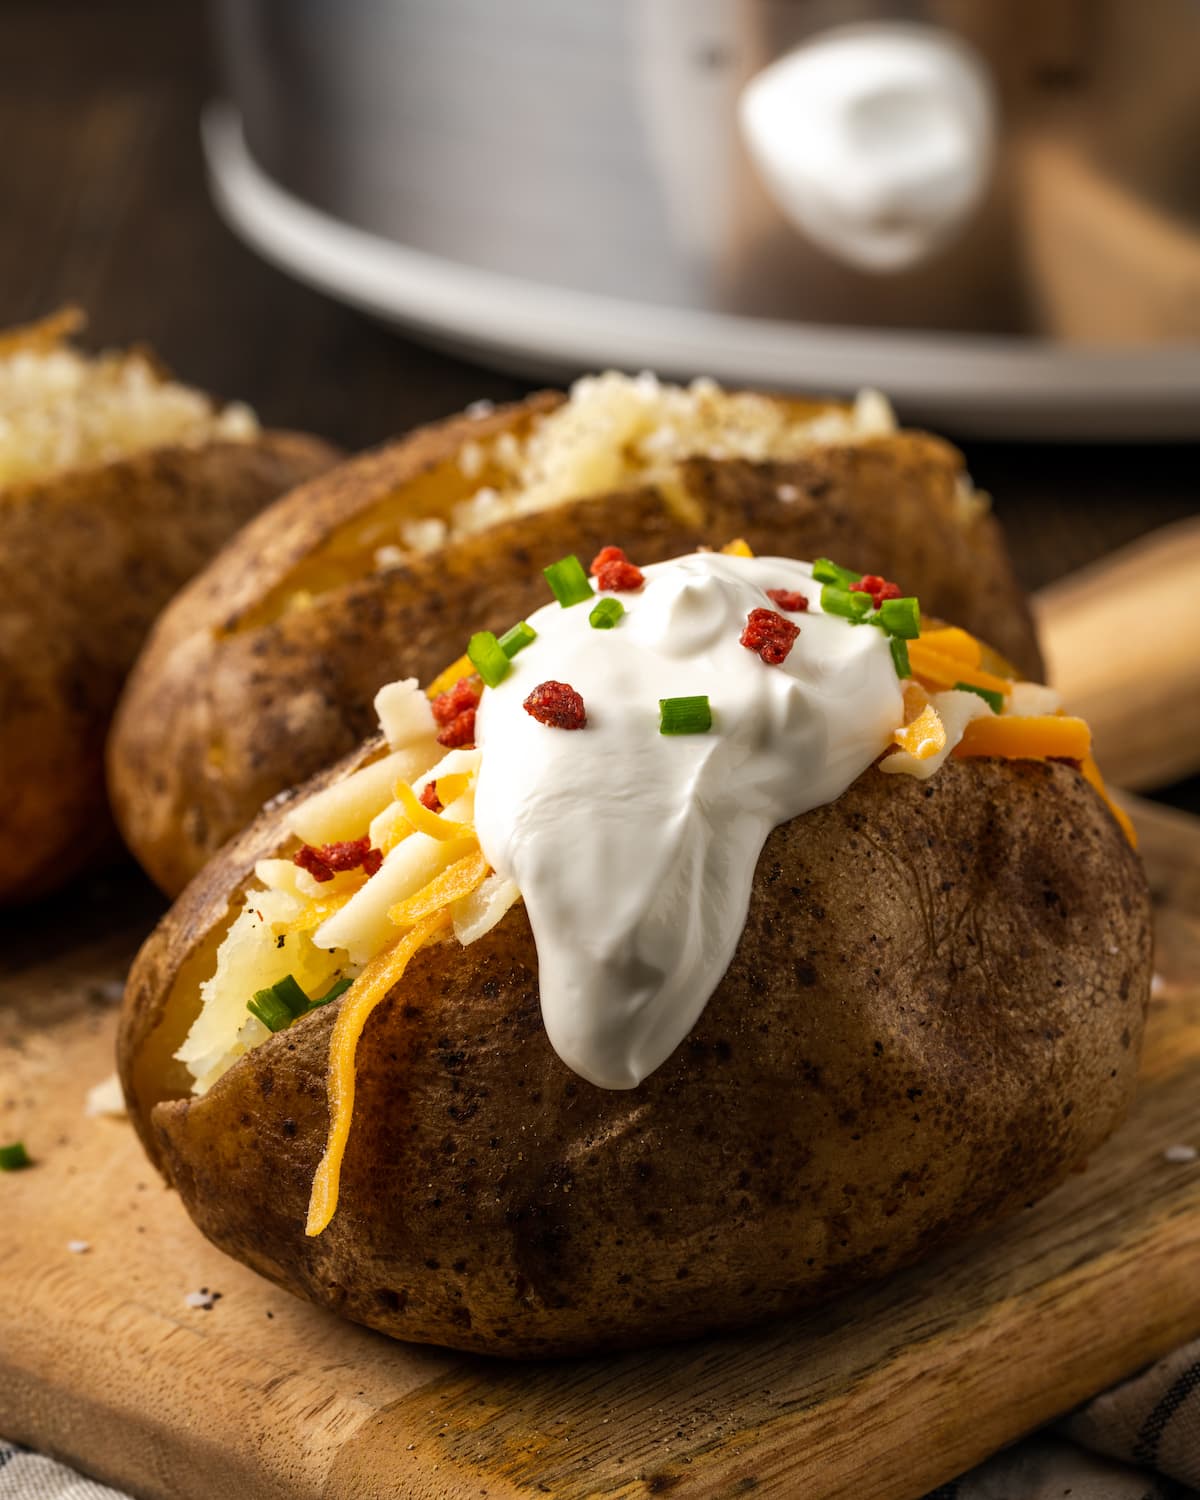 A crock pot baked potato topped with sour cream, bacon bits, and chives on a wooden board.